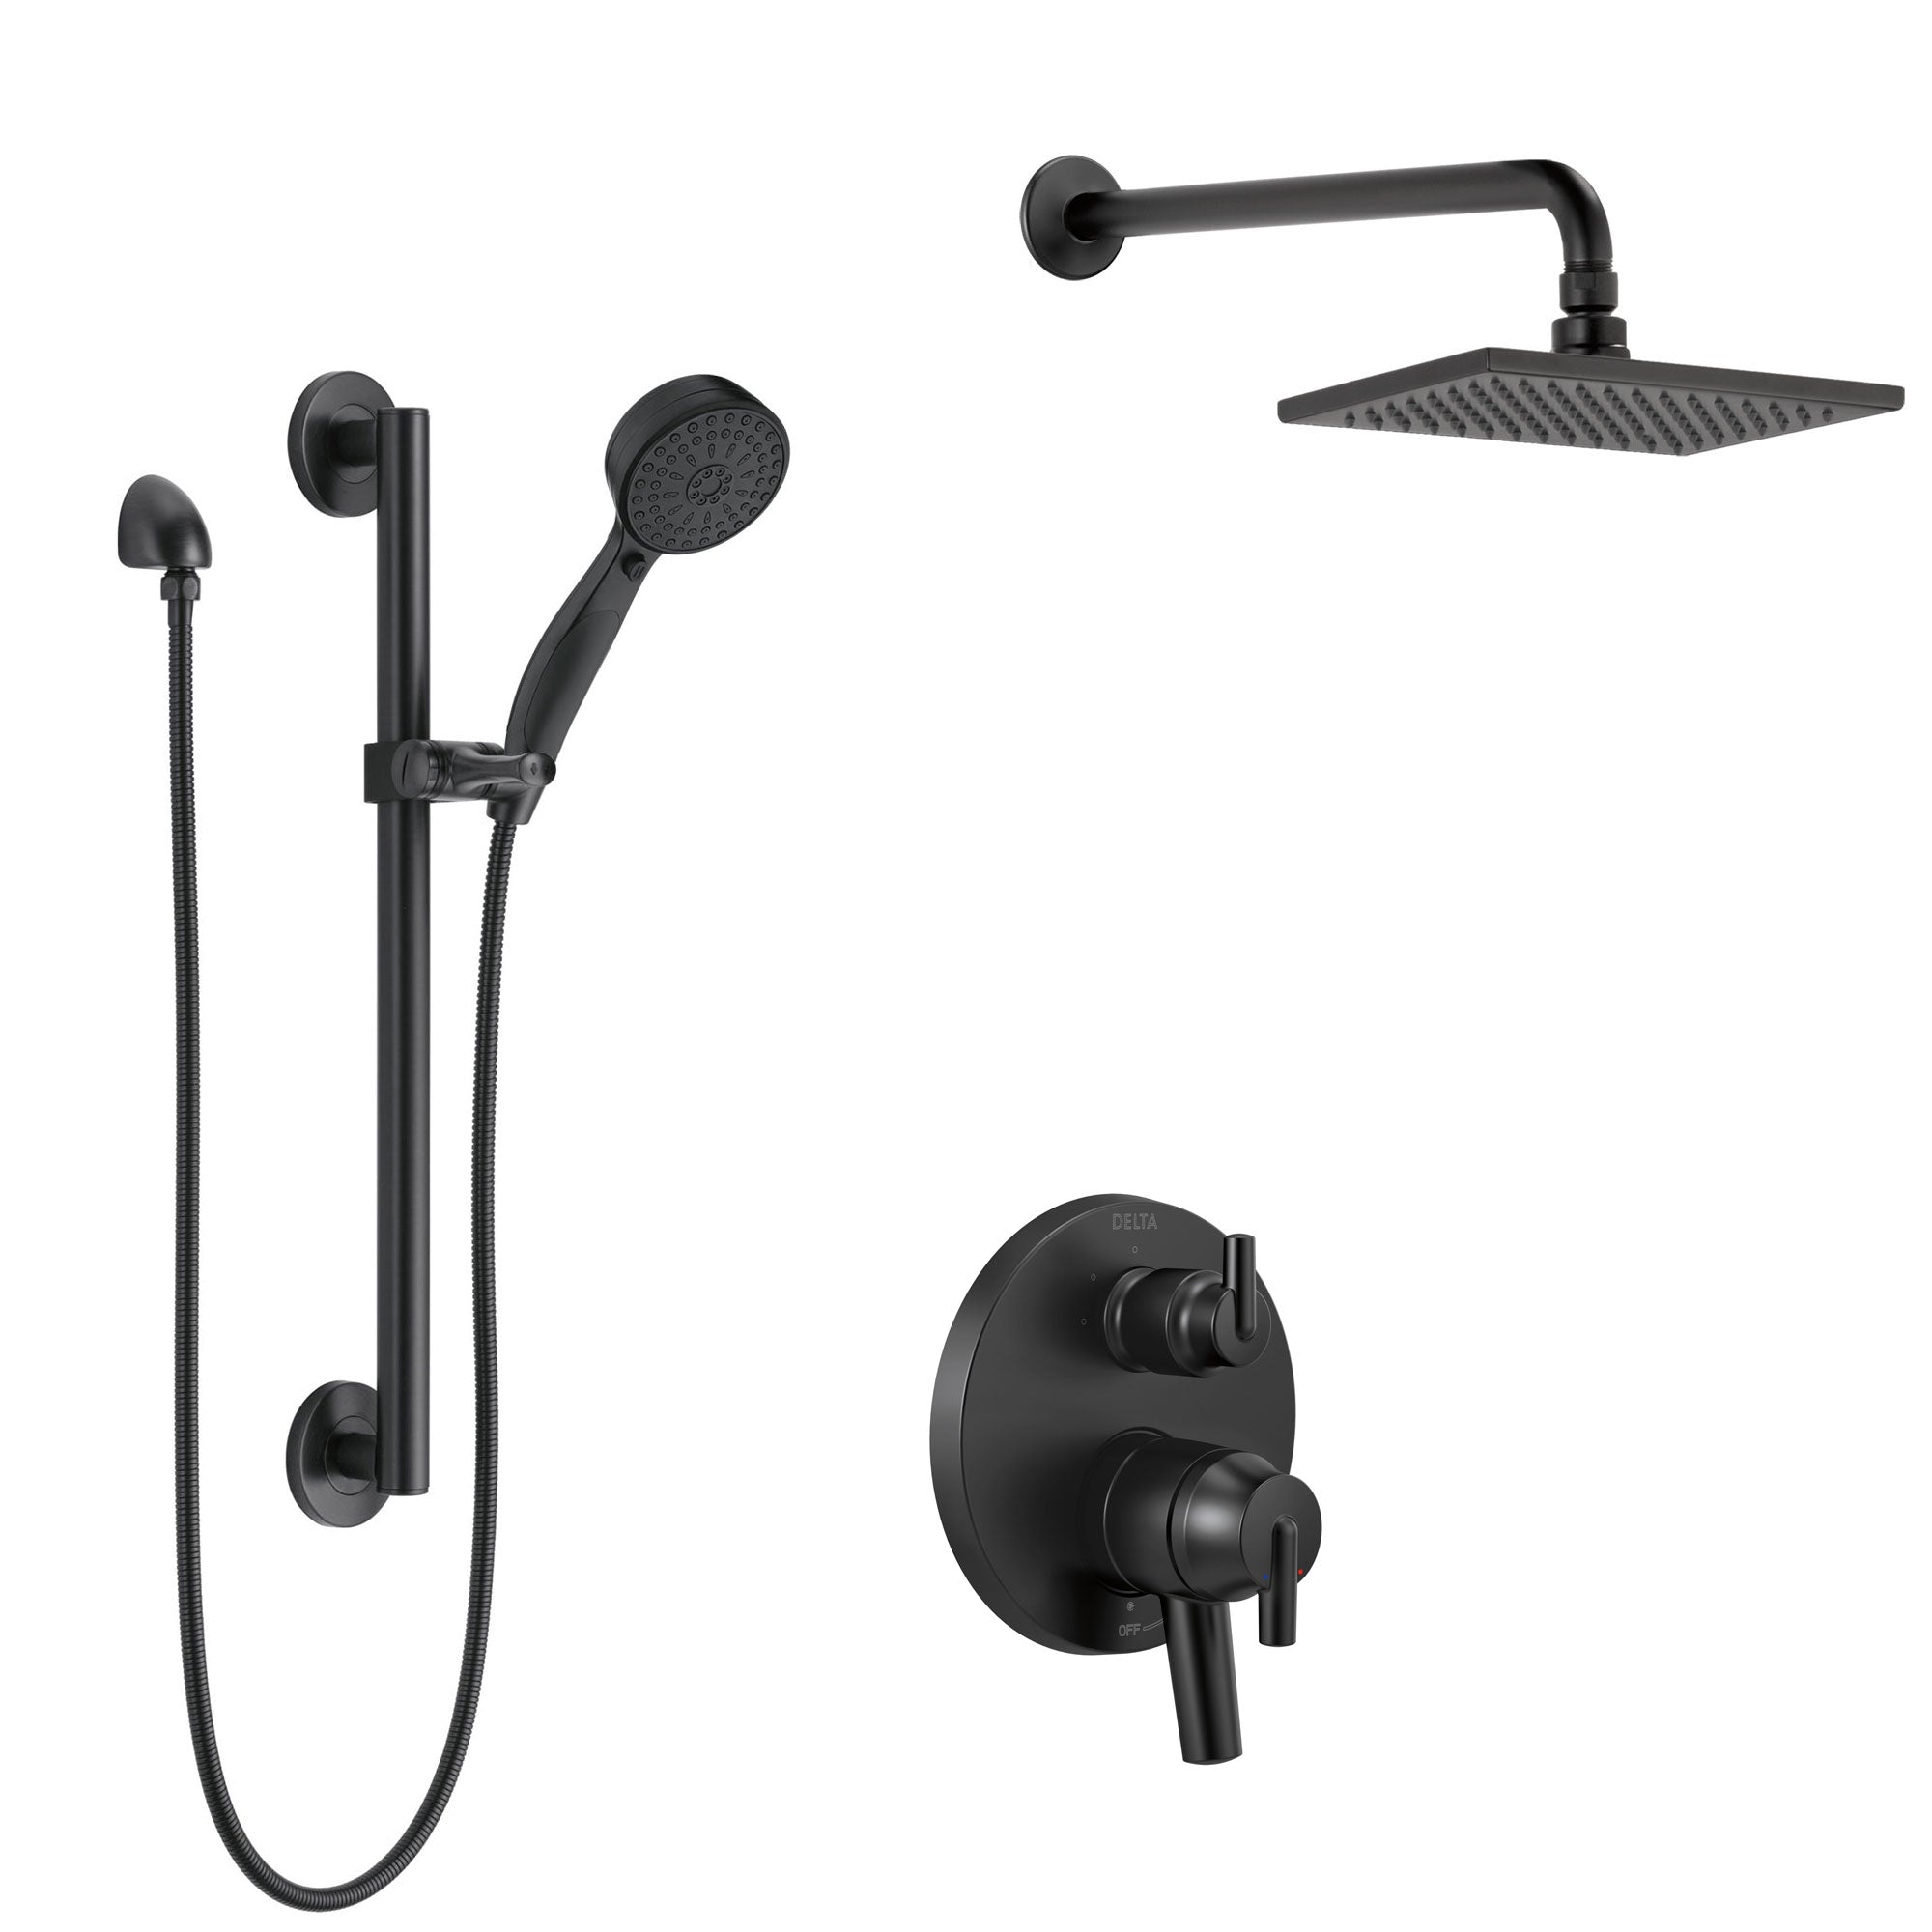 Delta Trinsic Matte Black Finish Shower System with Built-in Diverter, Modern Wall Mount Rain Showerhead, and Hand Shower with Grab Bar SS27859BL3